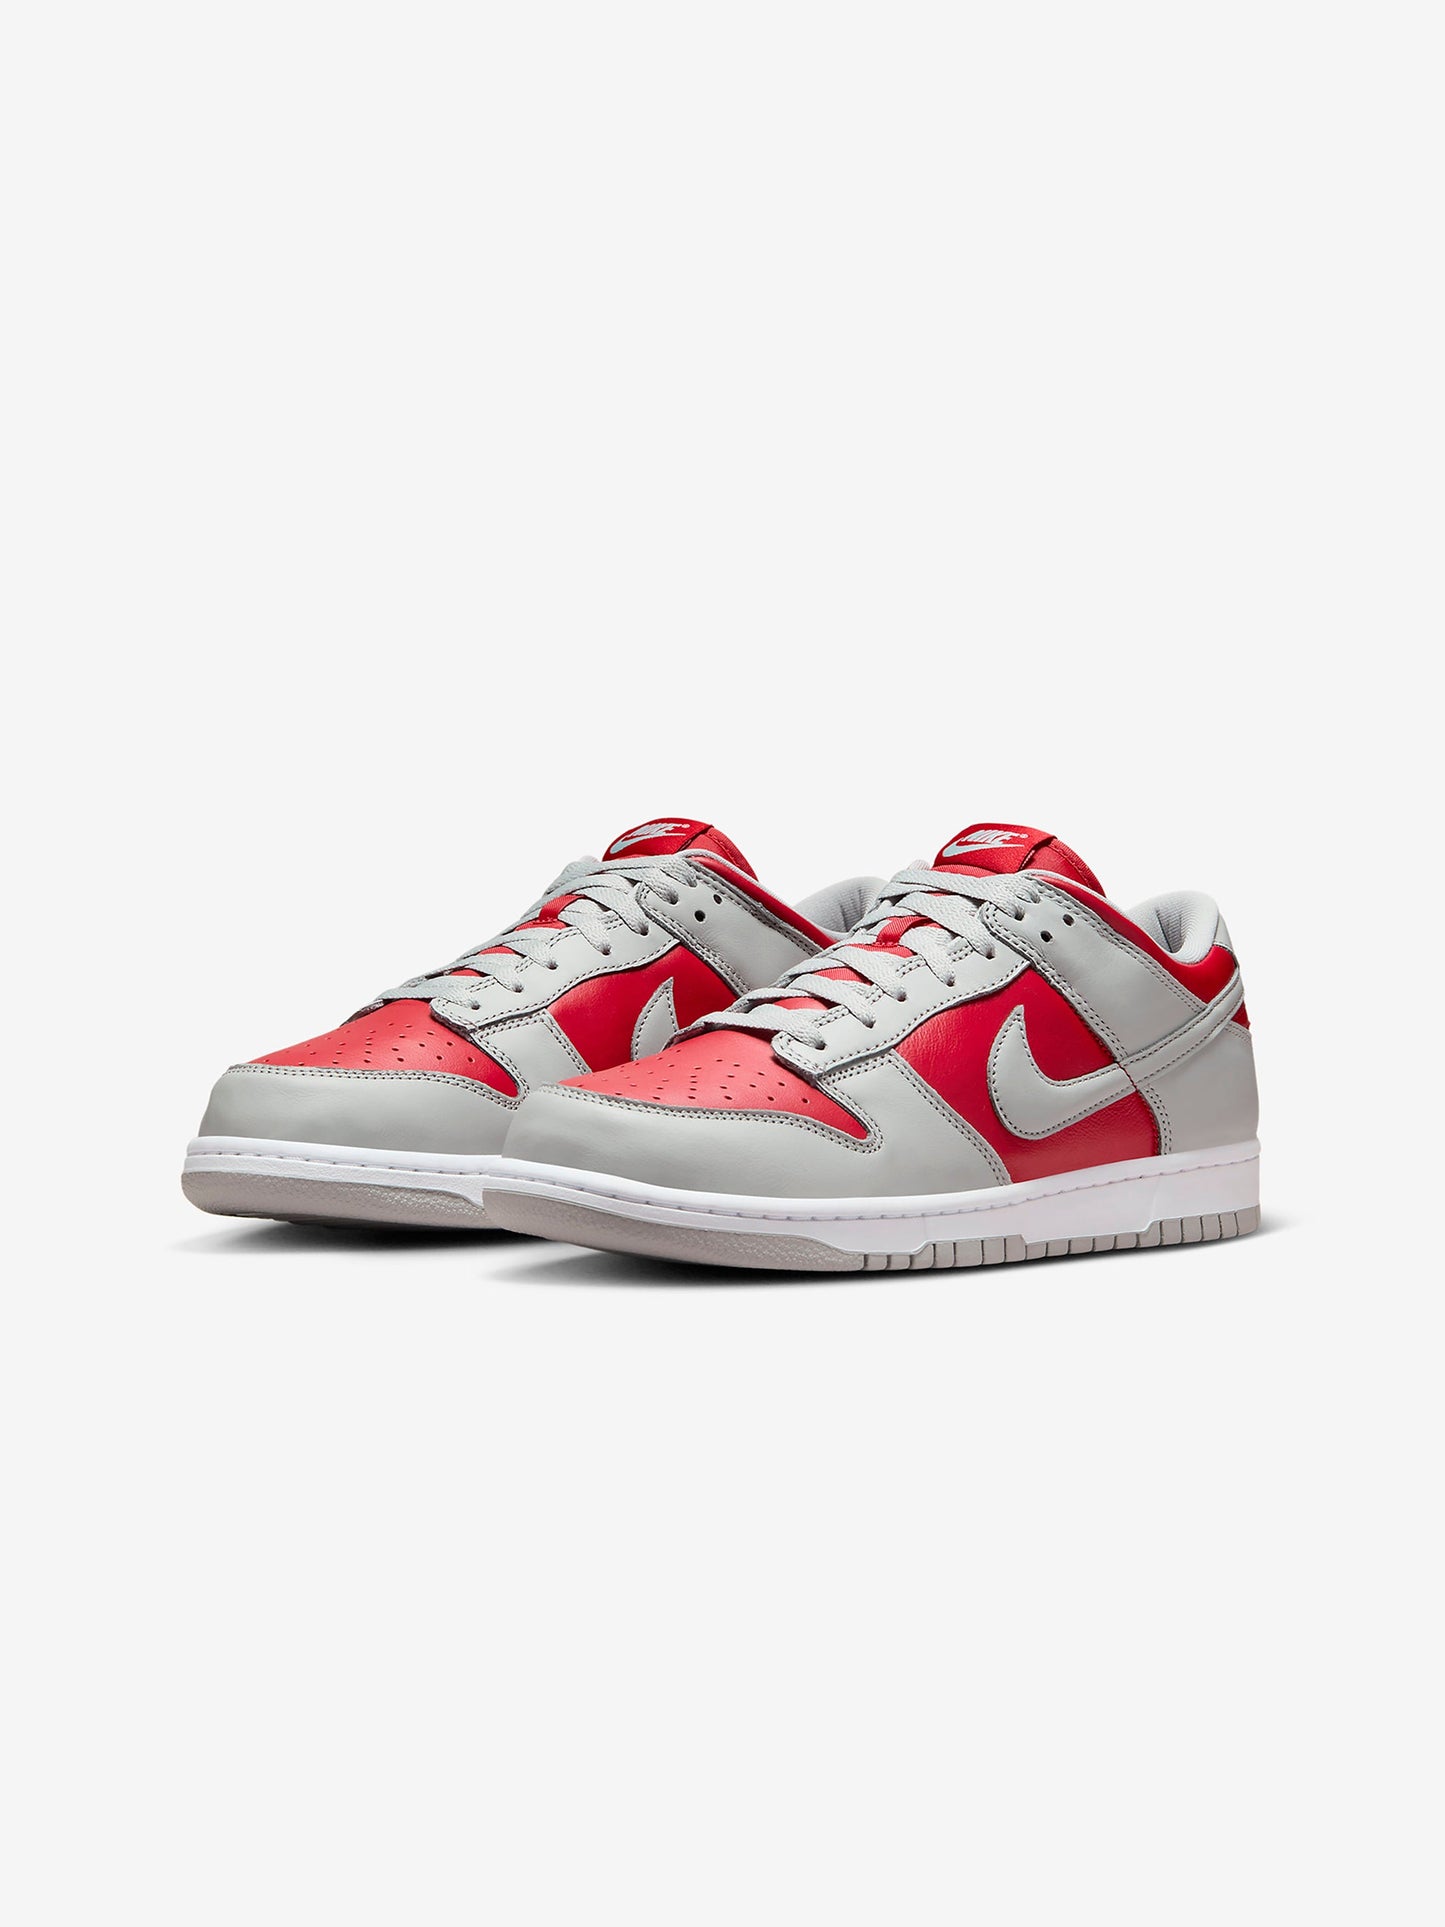 Nike Dunk Low (VARSITY RED/SILVER-WHITE)